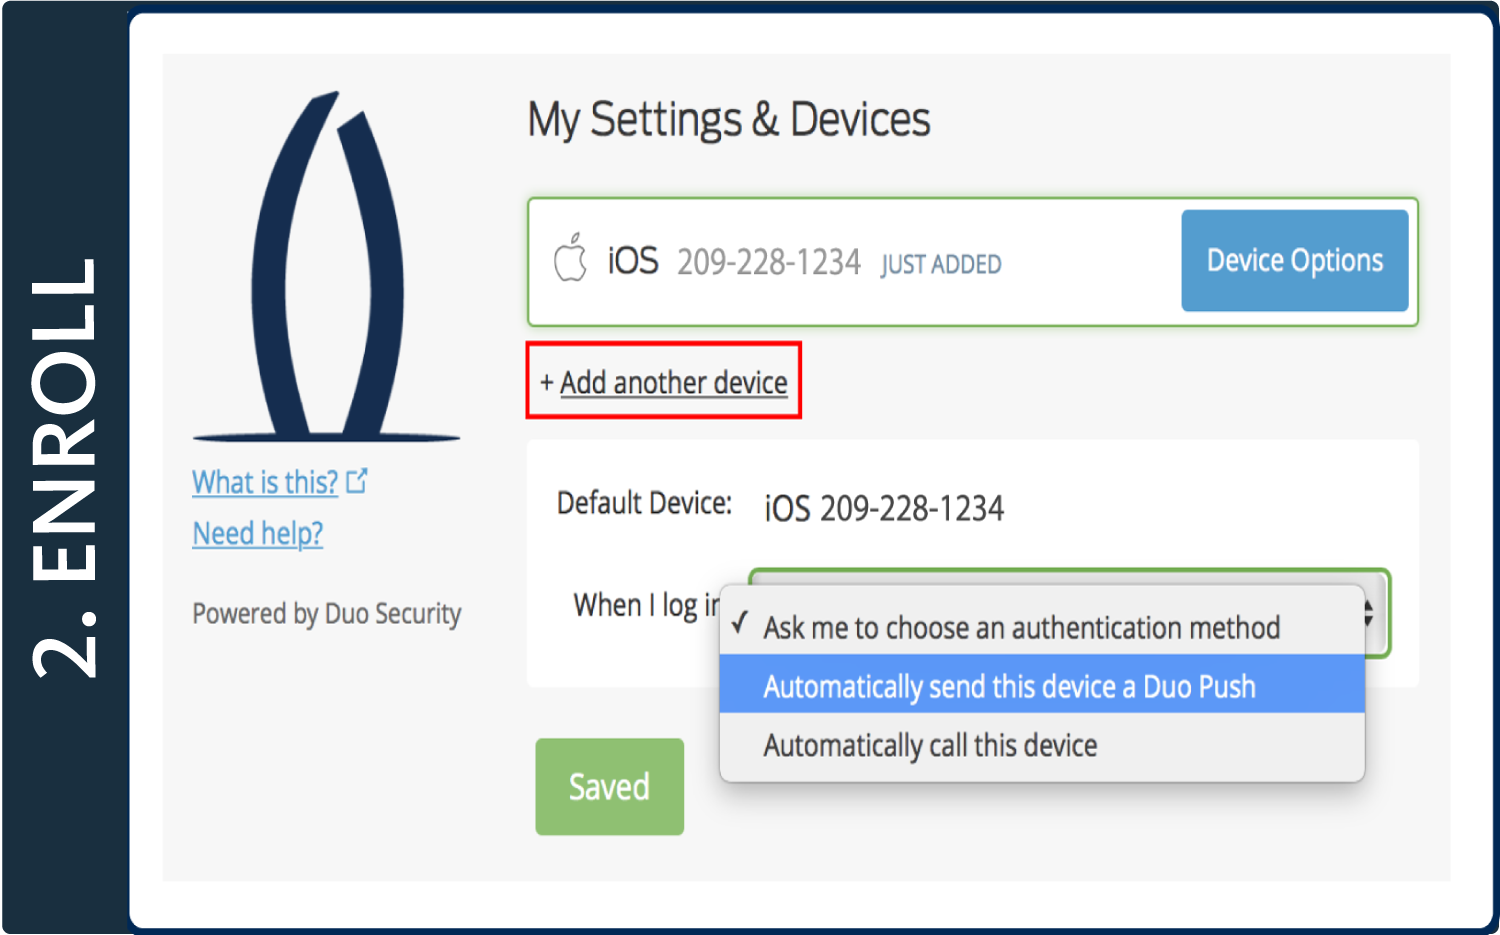 Screenshot of Duo pop-up window with the words "My Settings and Devices" and a box around "Add Another Device" link under the list of devices.